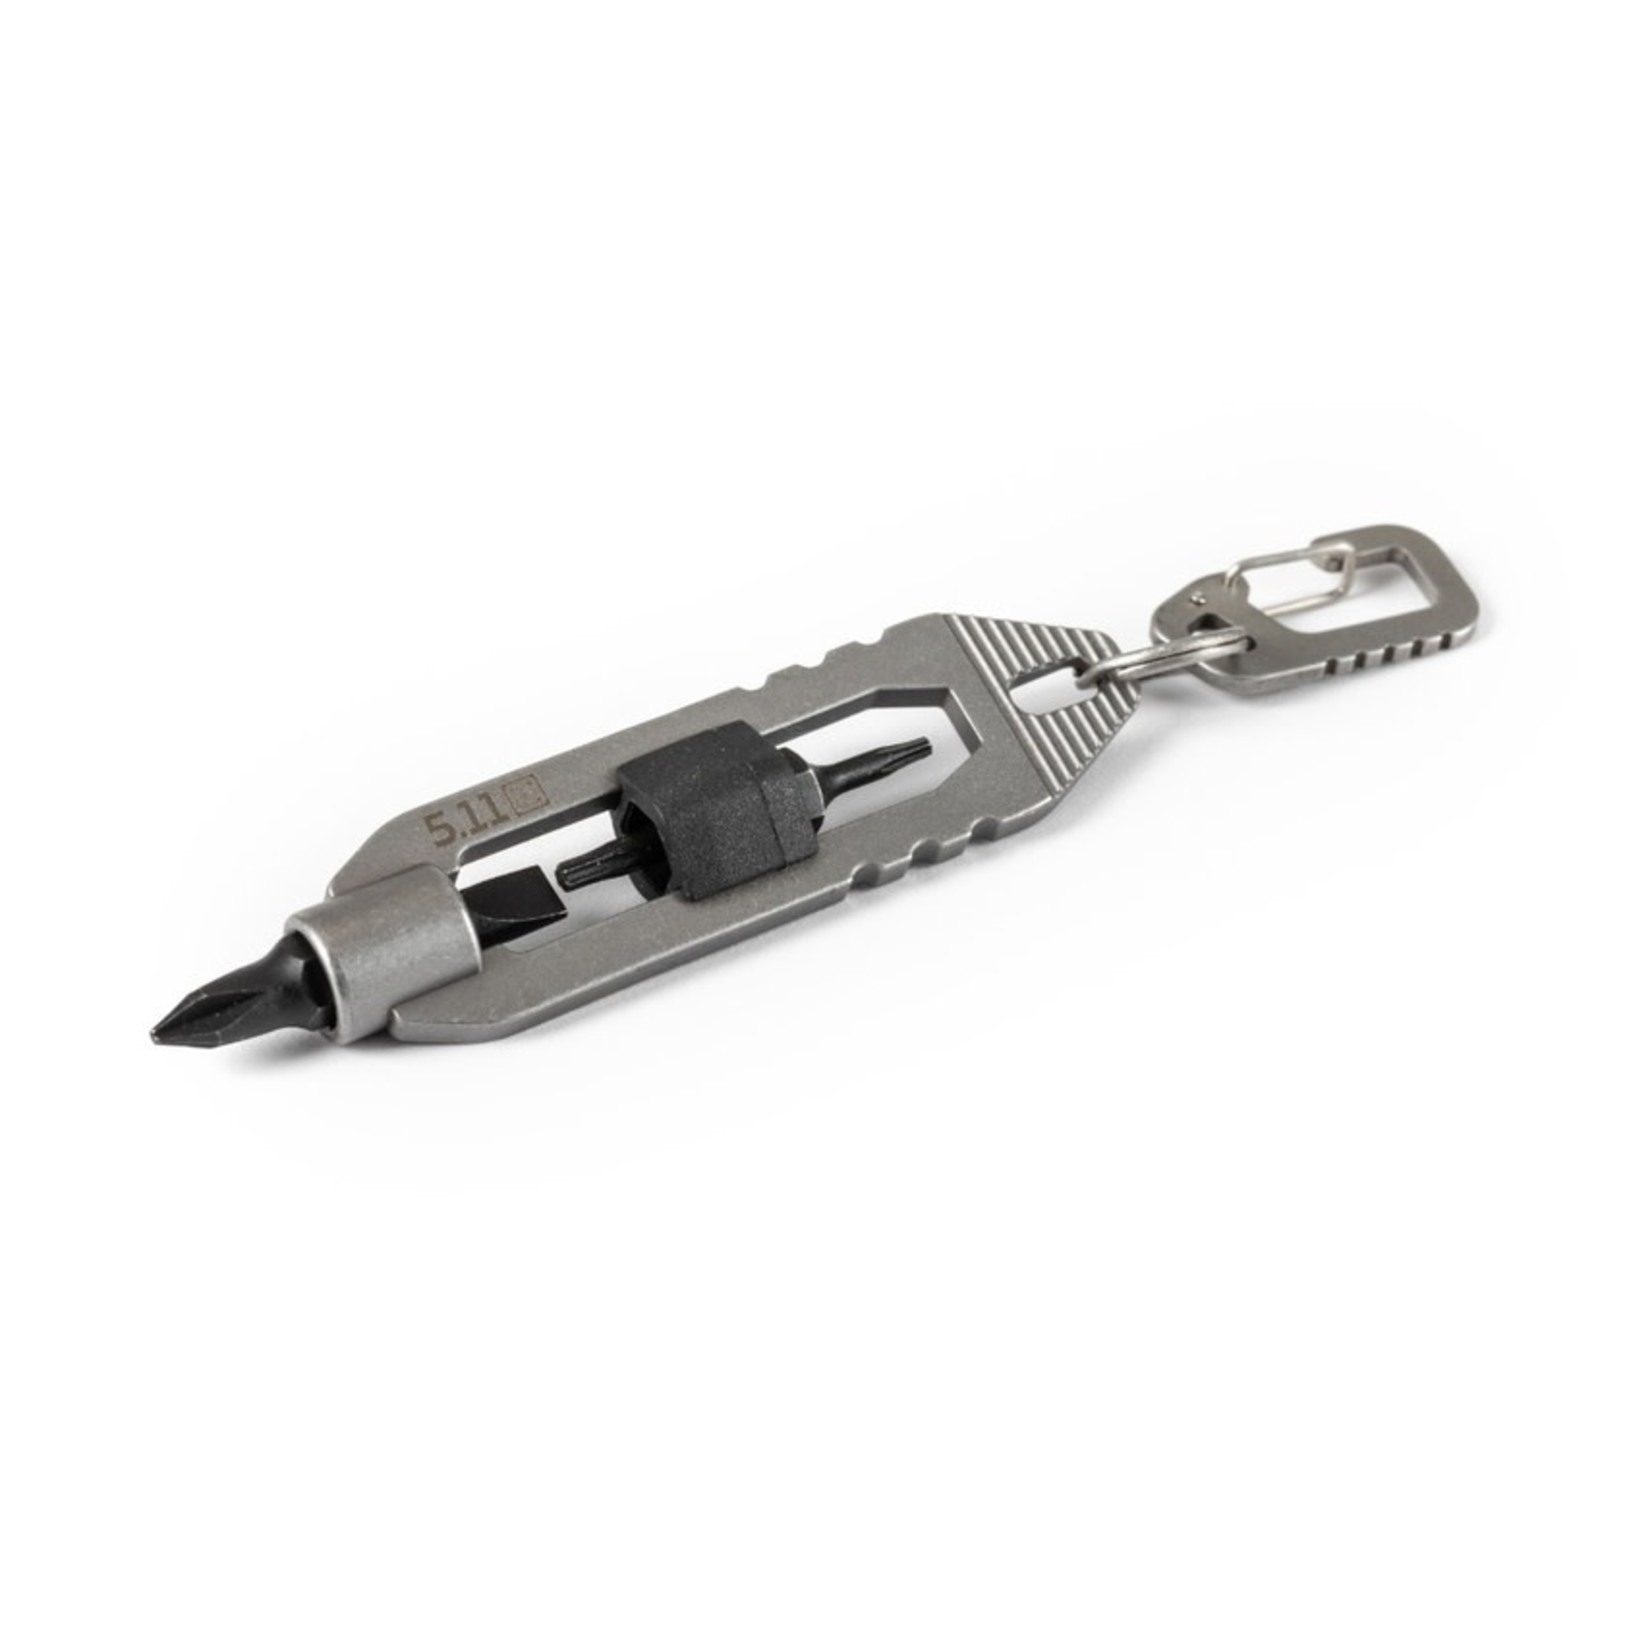 5.11 Tactical 5.11 EDT HEX Keychain Tool